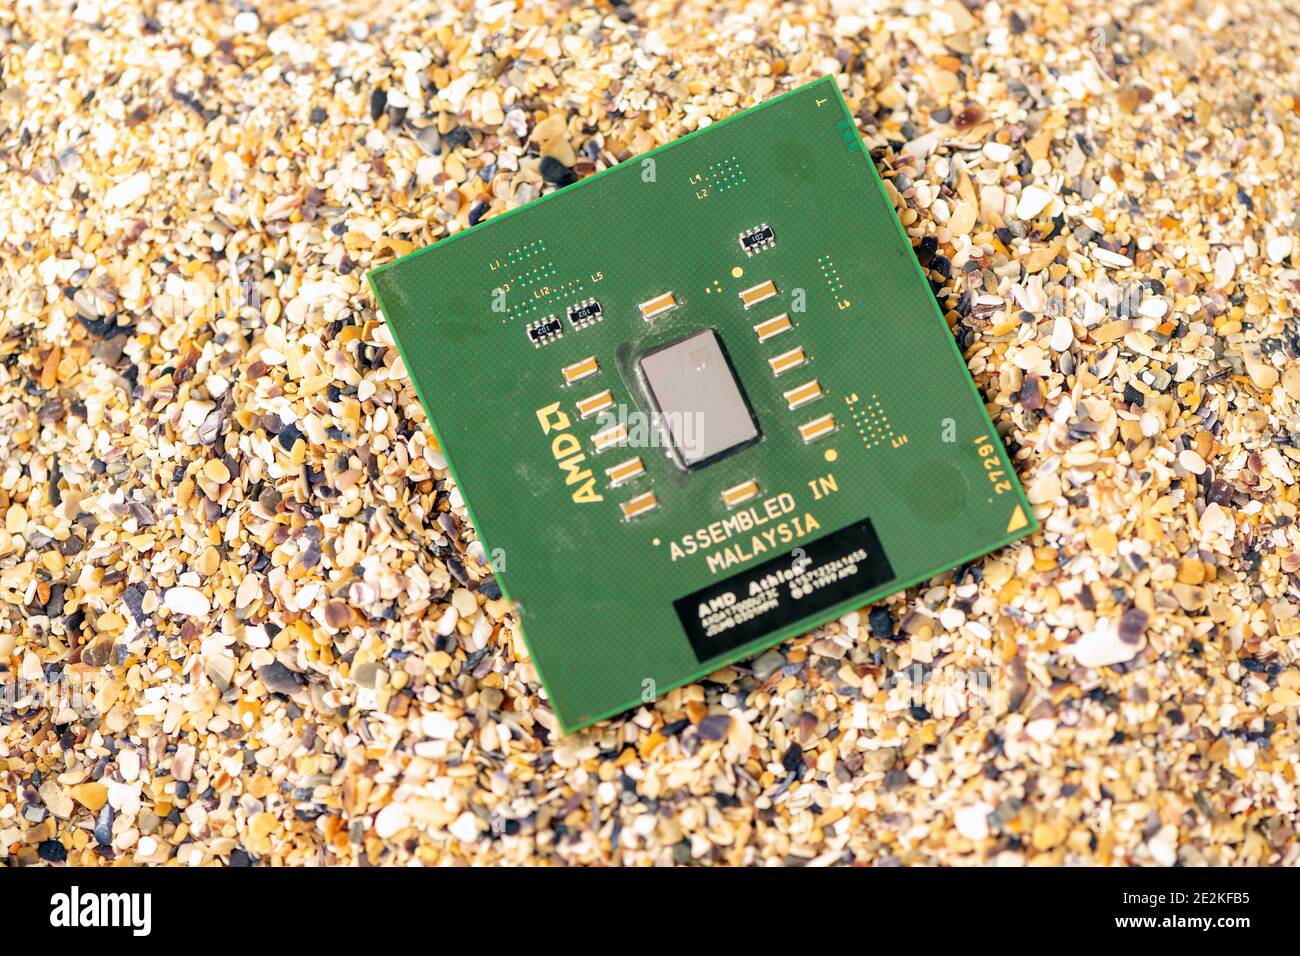 Timisoara, Romania - October 18, 2020: Close-up of an AMD Athlon XP AXDA1700DUT3C processor, 1700 MHz, socket A with sand in the background. Stock Photo